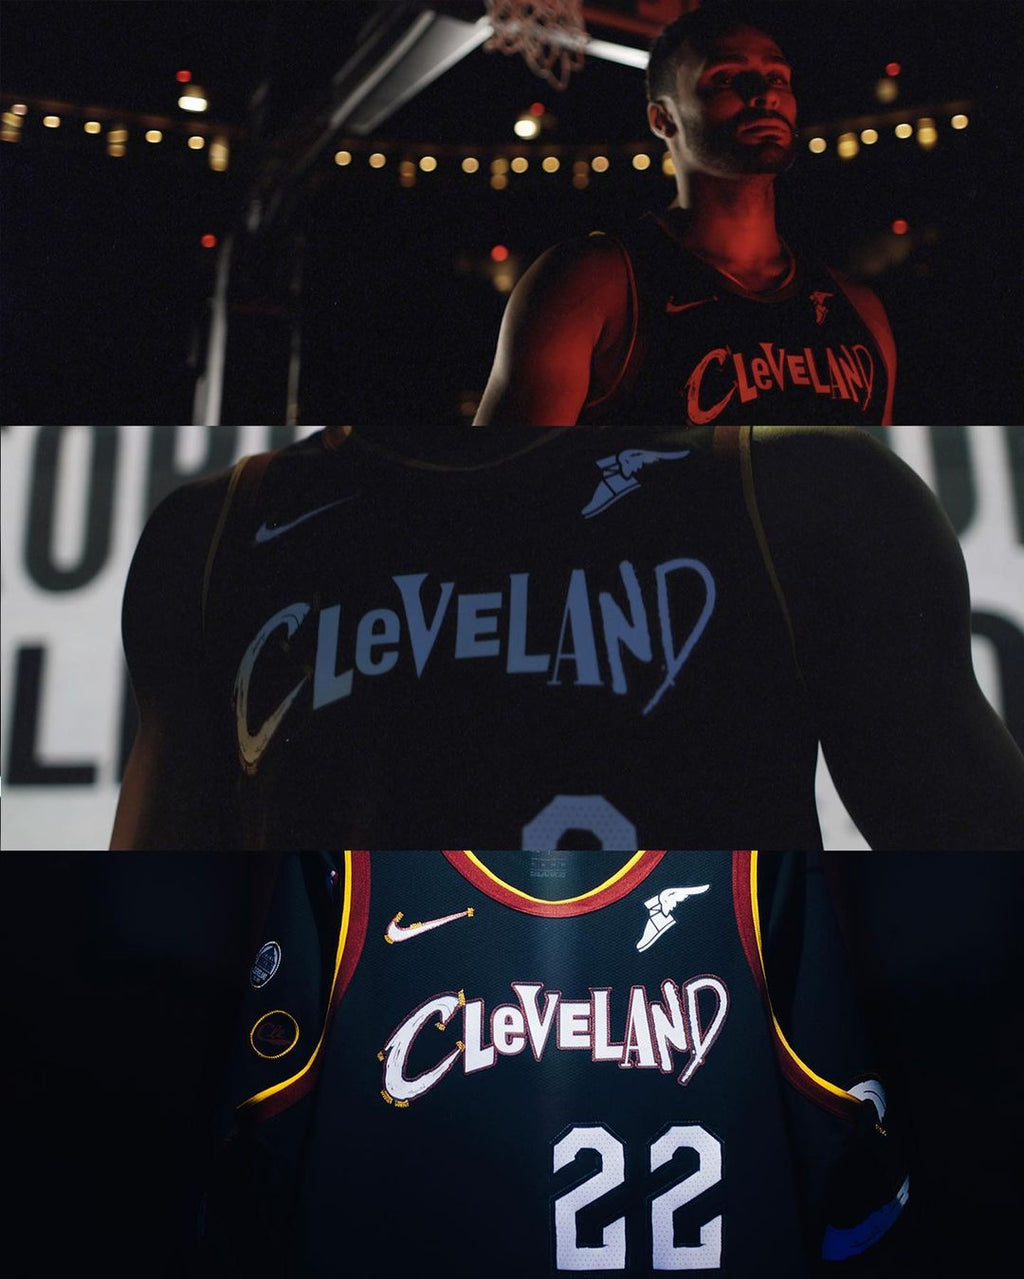 Cavs City Edition Jersey Pays Homage To Rock & Roll Hall of Fame